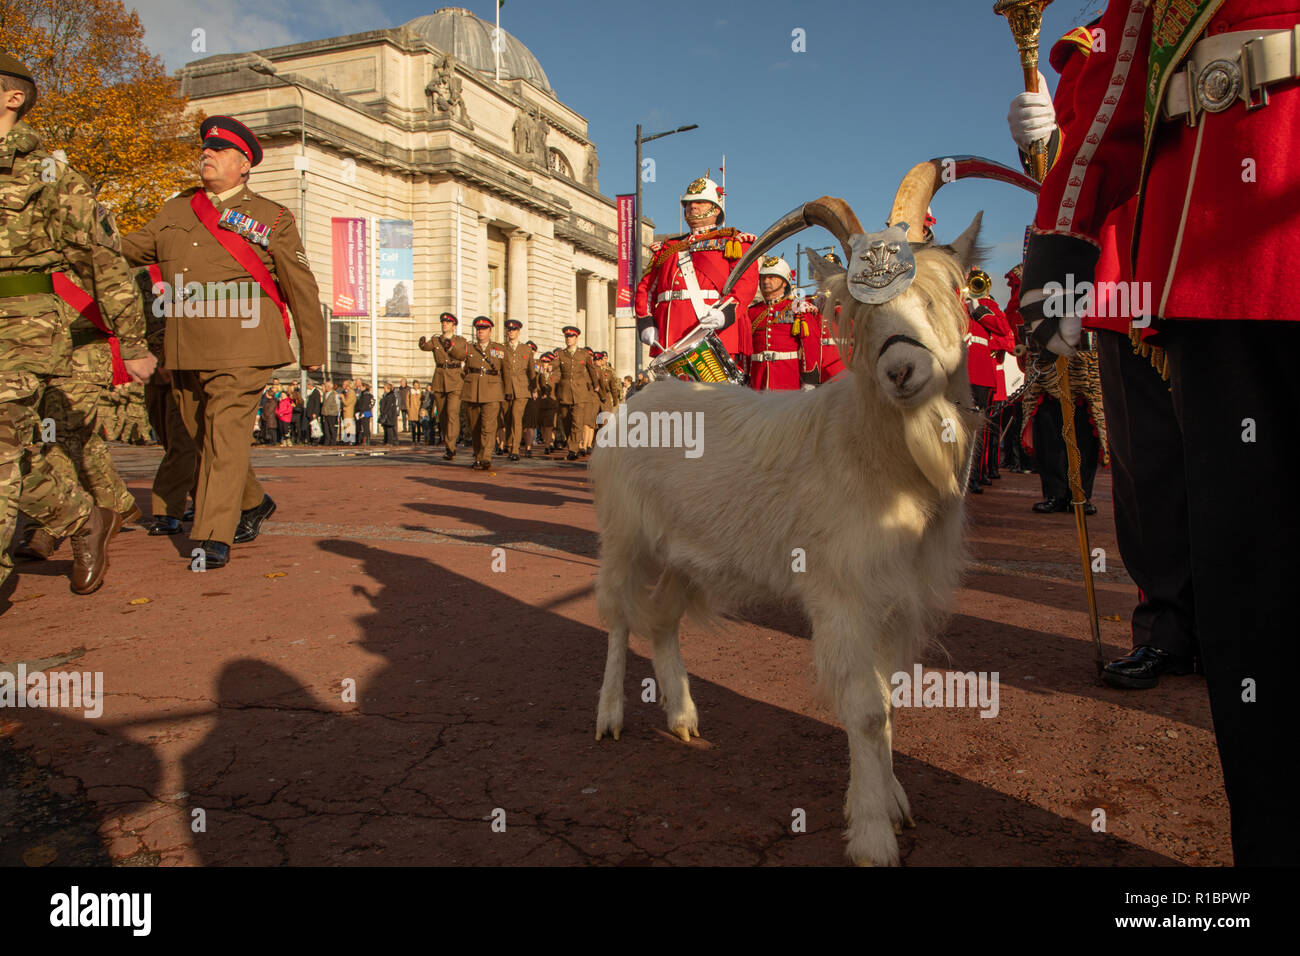 Cardiff, UK. 11th November 2018. Remembrance Sunday, Centenary Armistice Day Commemorations at the Welsh National War Memorial in Cardiff. Credit Haydn Denman/Alamy Live News Stock Photo